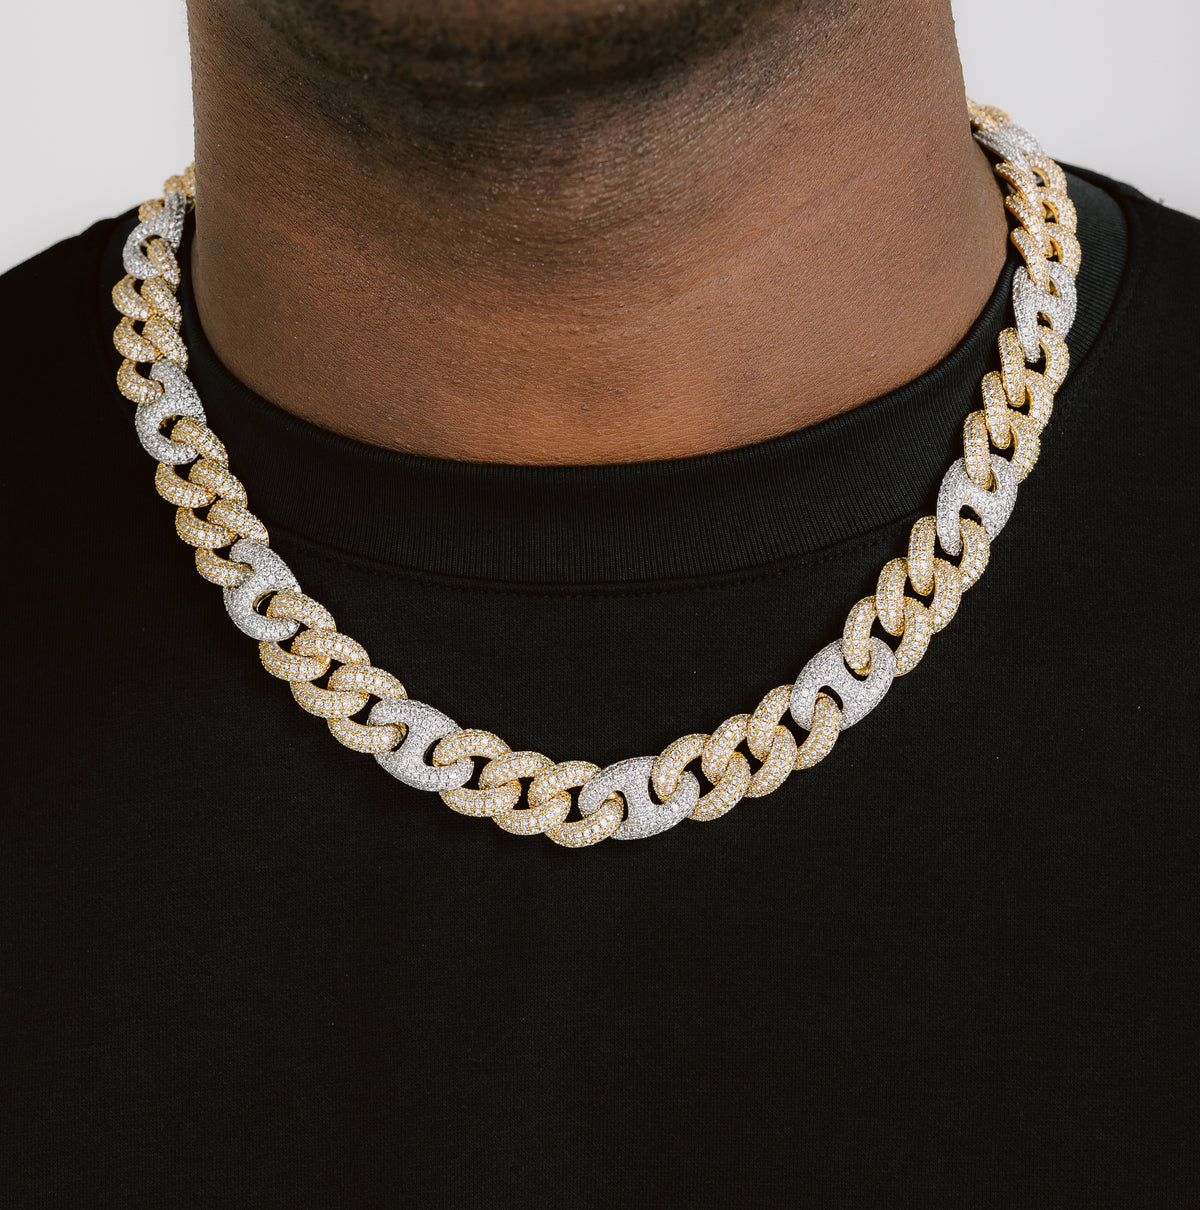 Nike Inspired Necklace Lettering Silver Gold Iced Out 